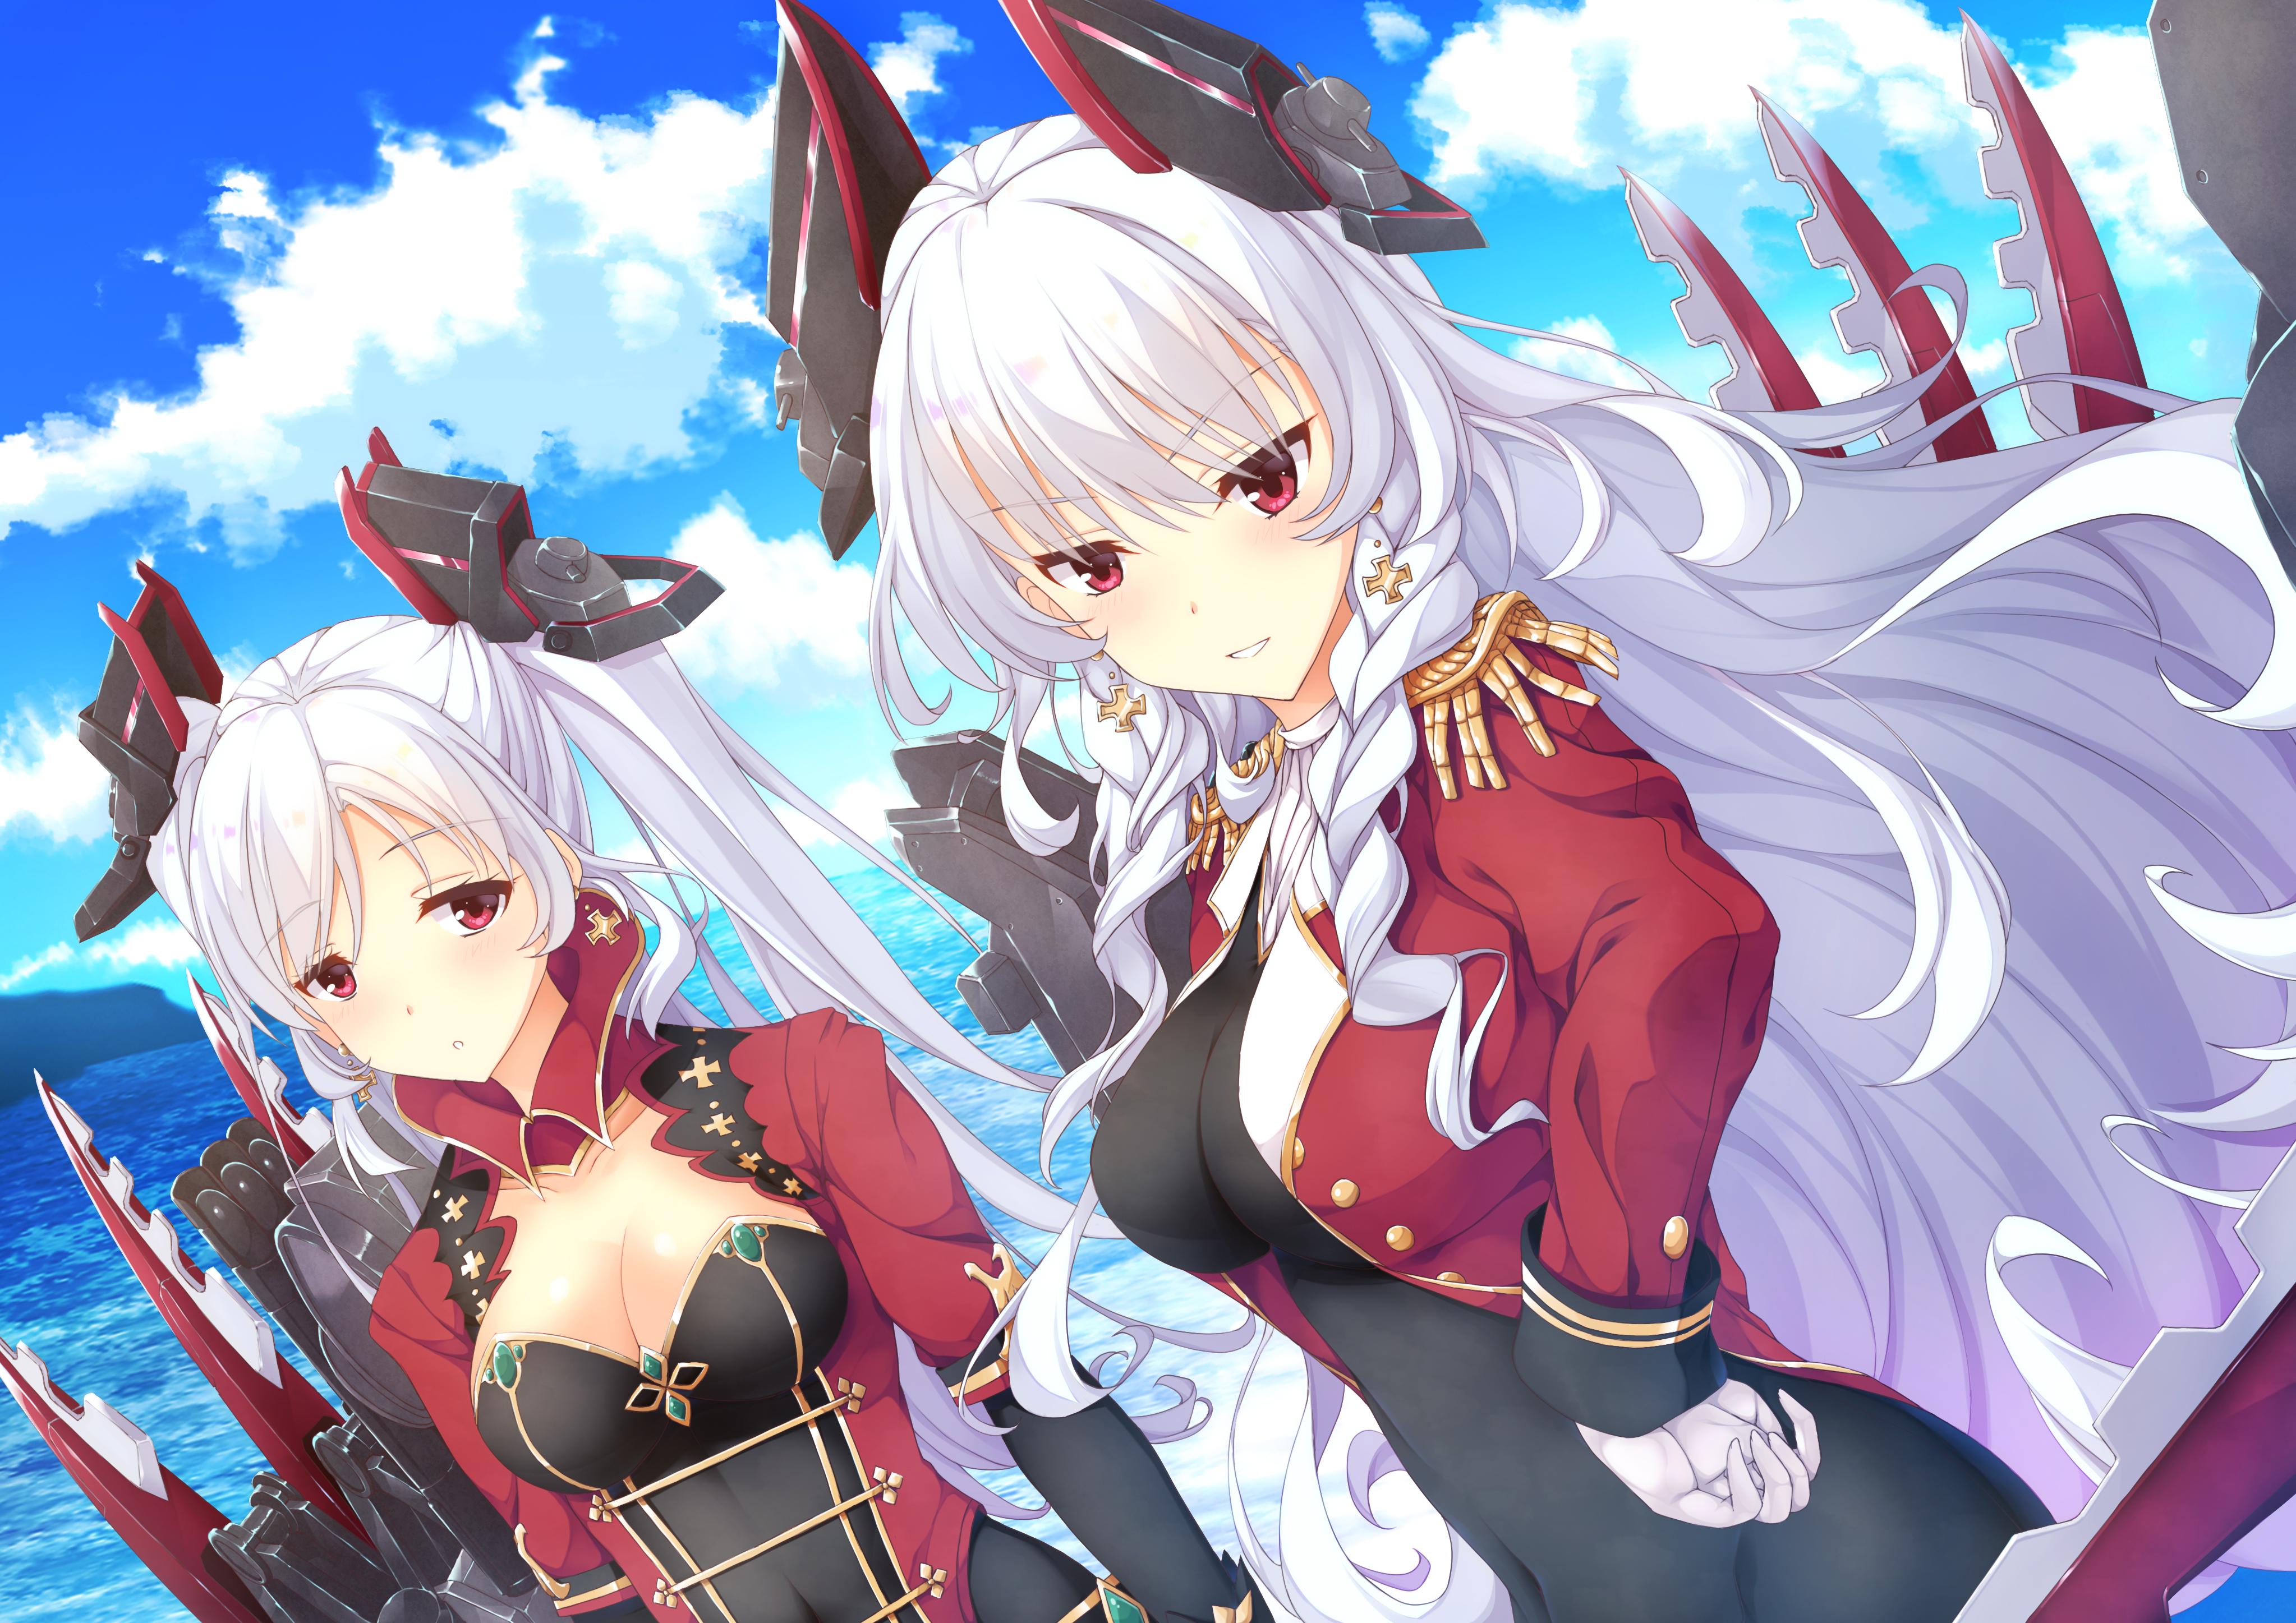 Anime 4093x2894 Blue Oath Scharnhorst (Blue Oath) Gneisenau (Blue Oath) gold-trimmed clothes hair accessories red eyes white hair Rigging long hair anime girls military uniform stylized military uniform Golden Iron cross epaulettes hair in face two women sky looking at viewer pale detailed high detail Caucasian